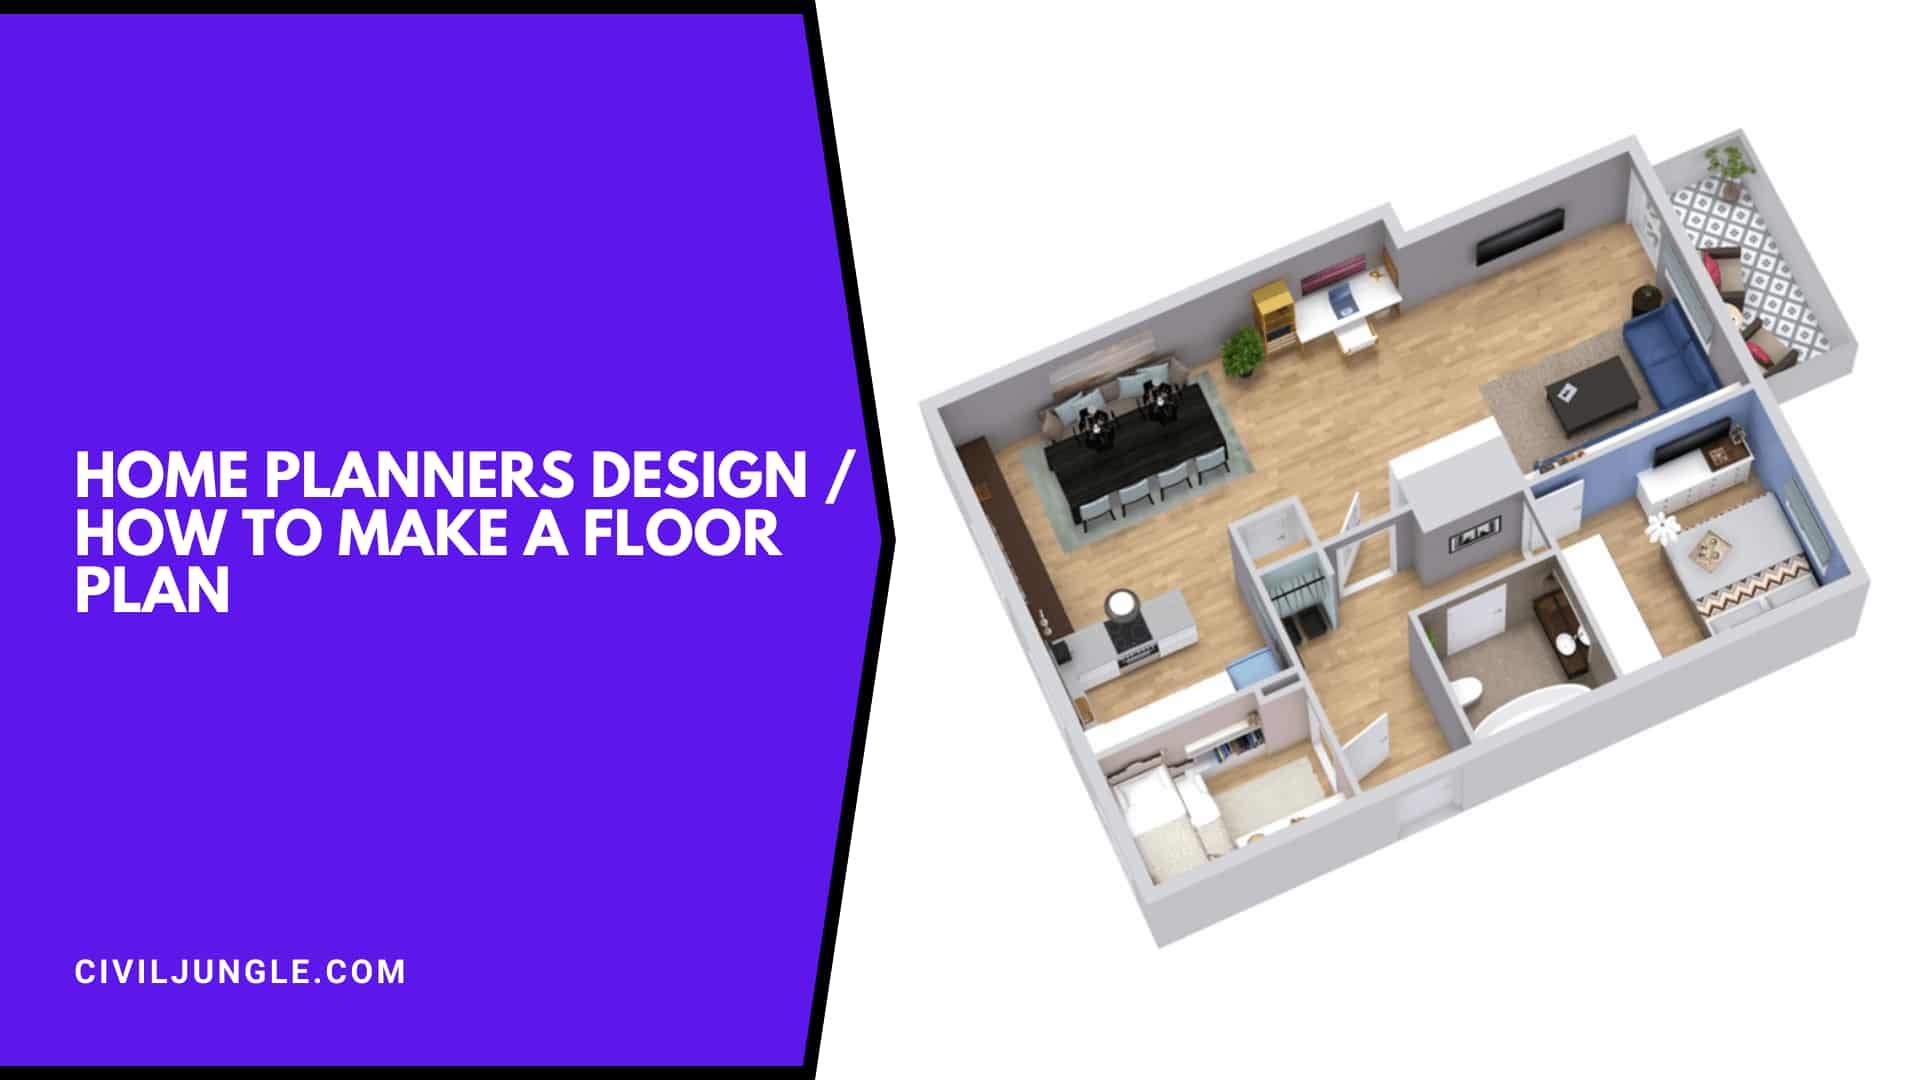 Home Planners Design / How to Make a Floor Plan